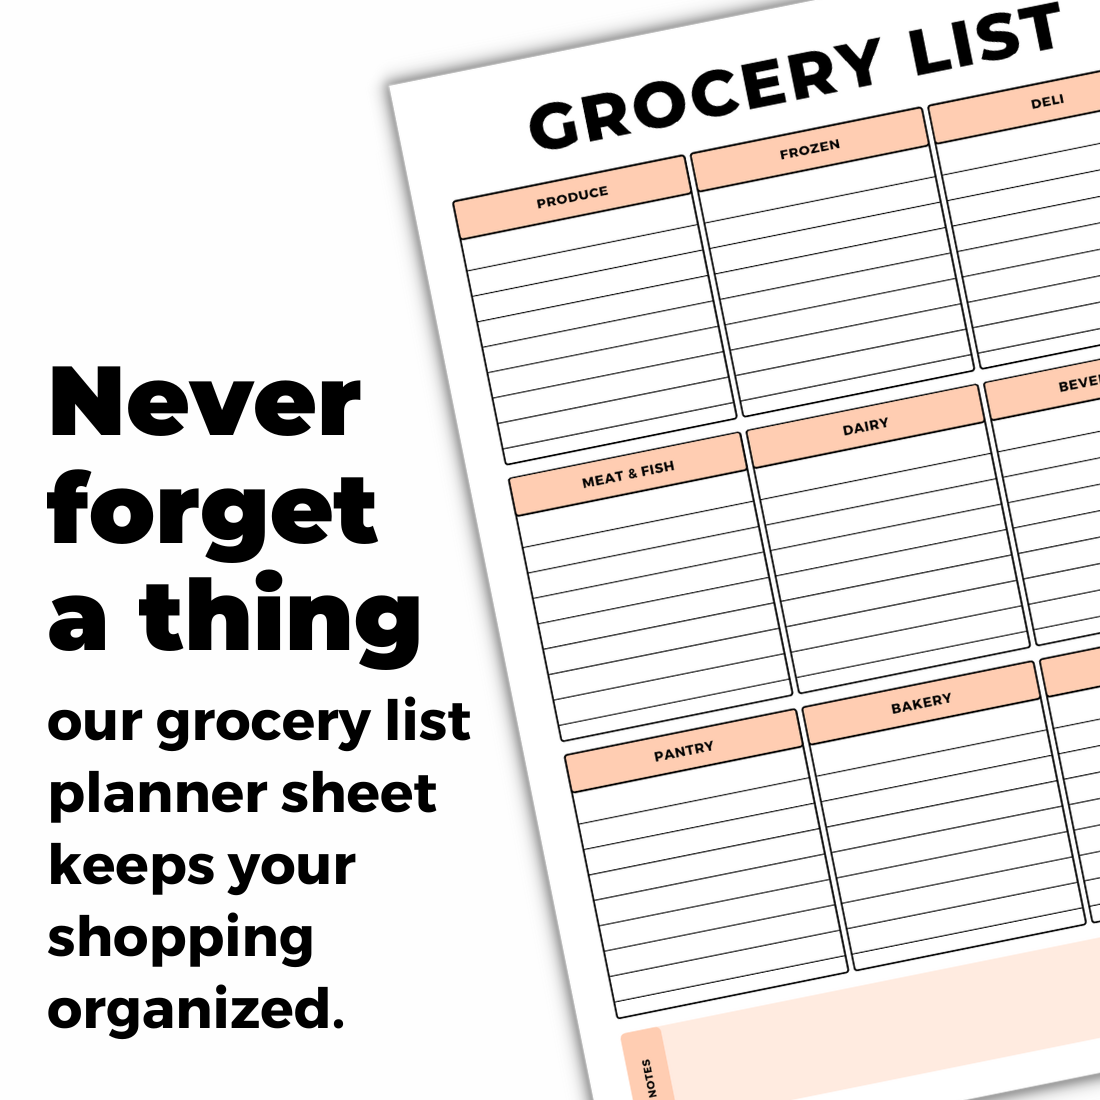 Free Printable Grocery List Templates in PDF, PNG and JPG Formats